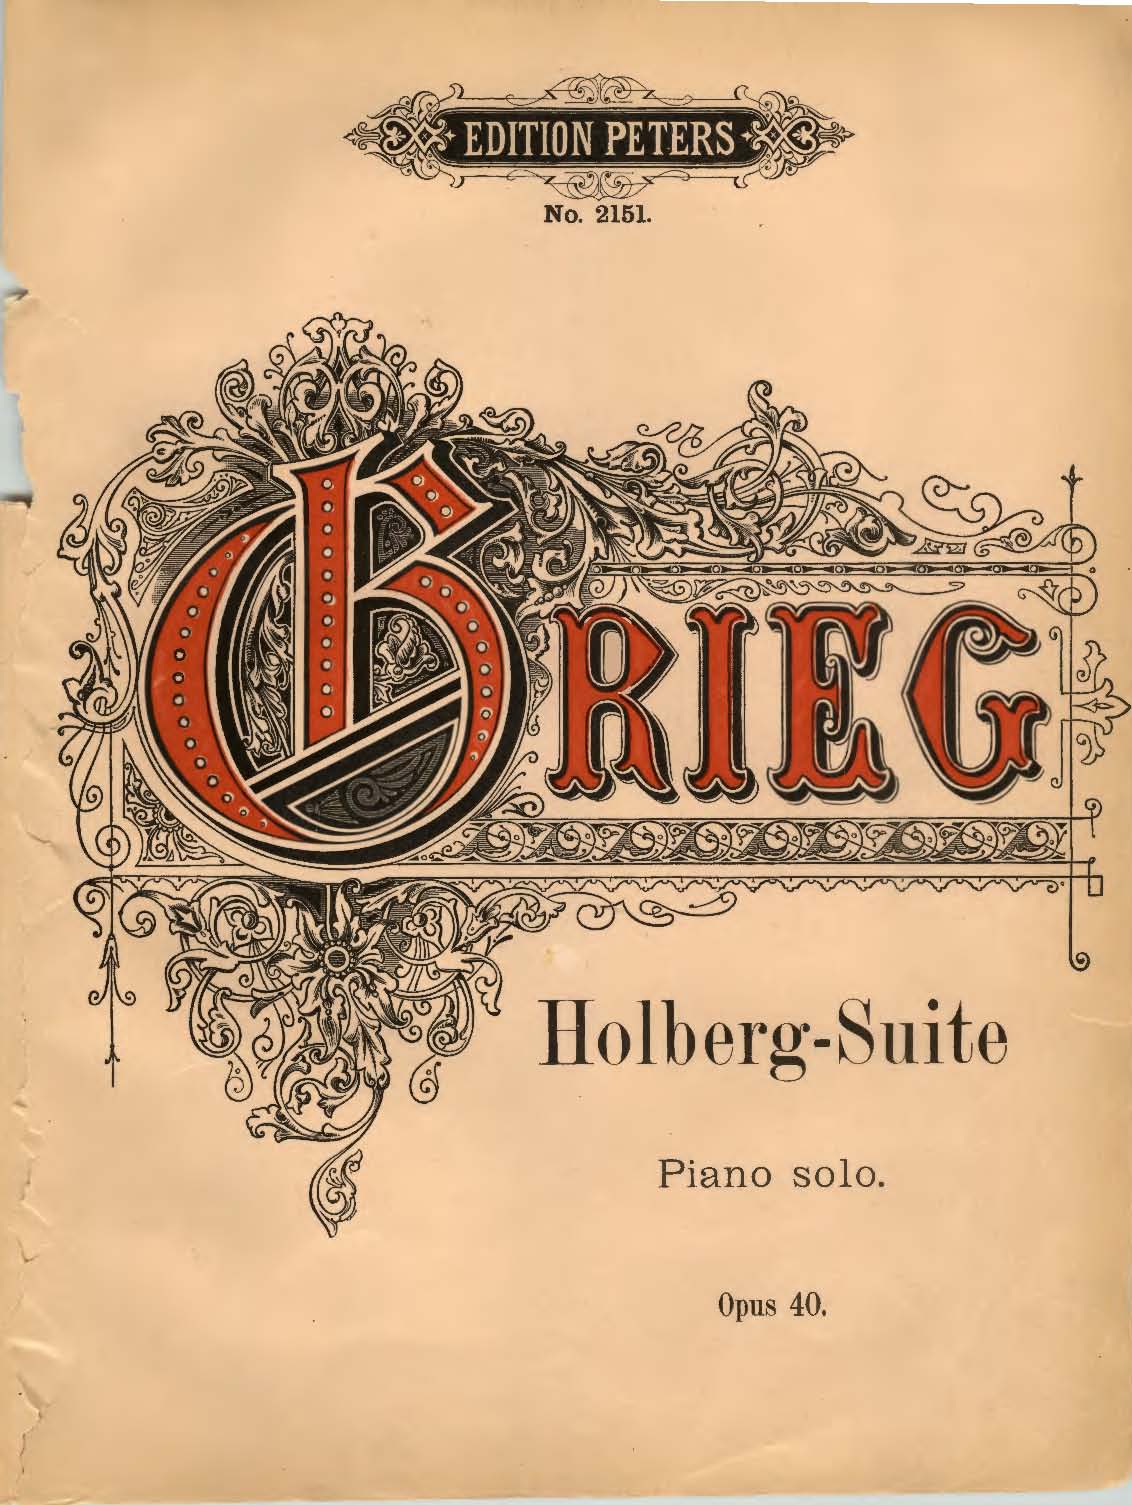 Peters edition of Grieg's From Holberg's Time